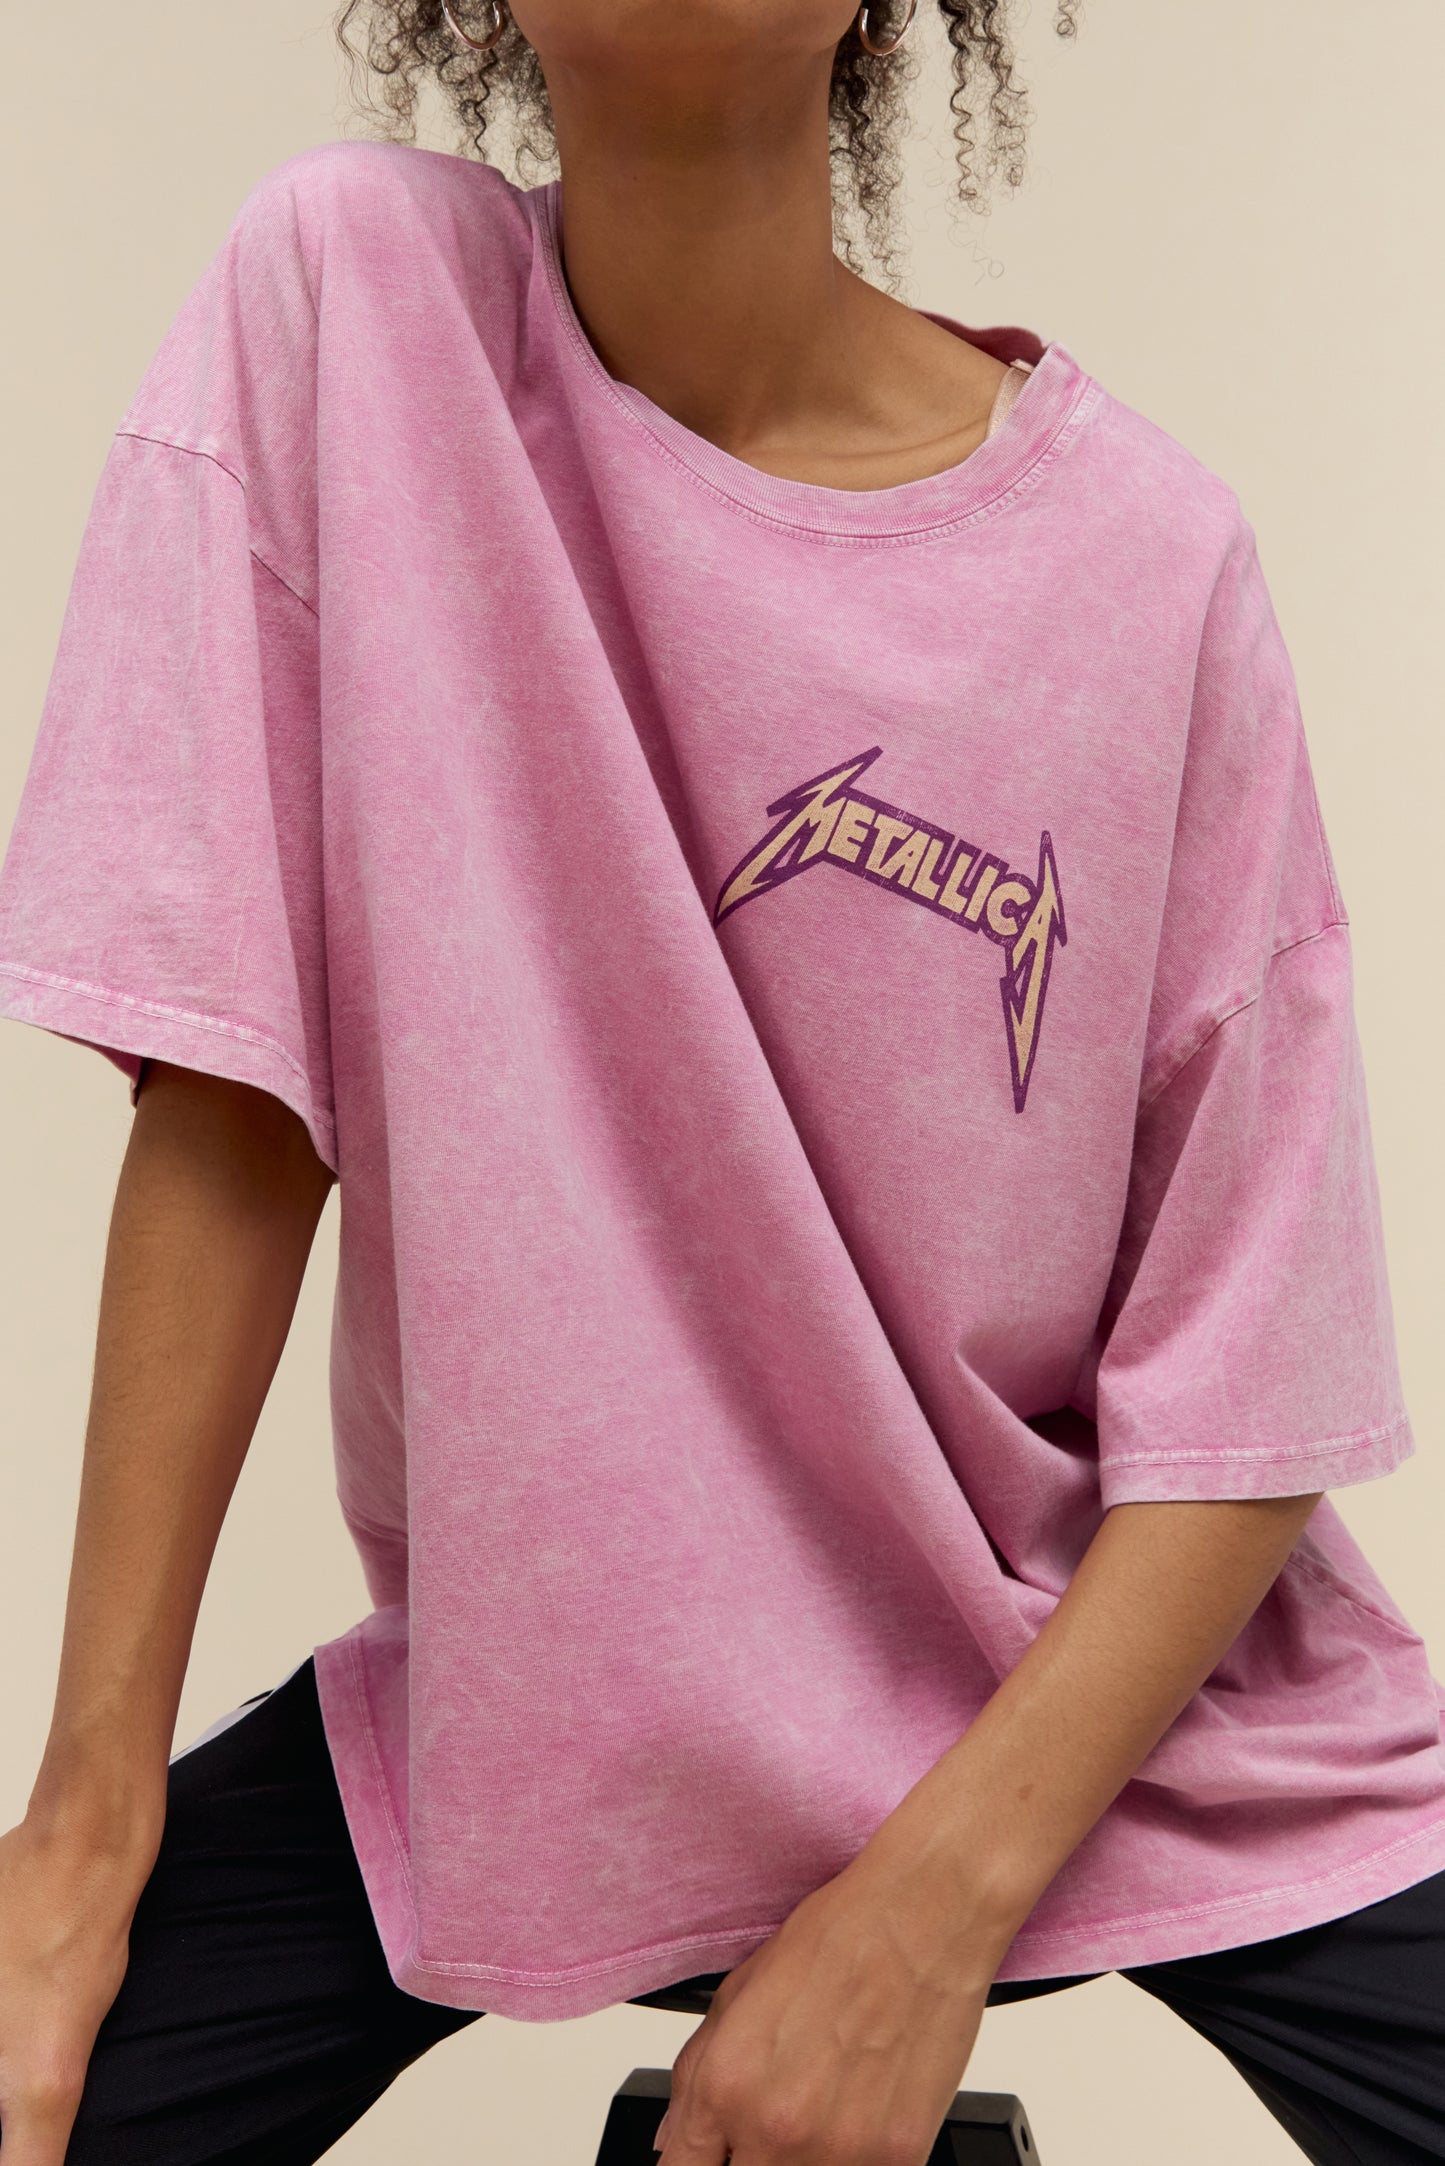 Model wearing a Metallica US Tour 1985 graphic tee with an exaggerated oversized fit and a pink acid washed colorway